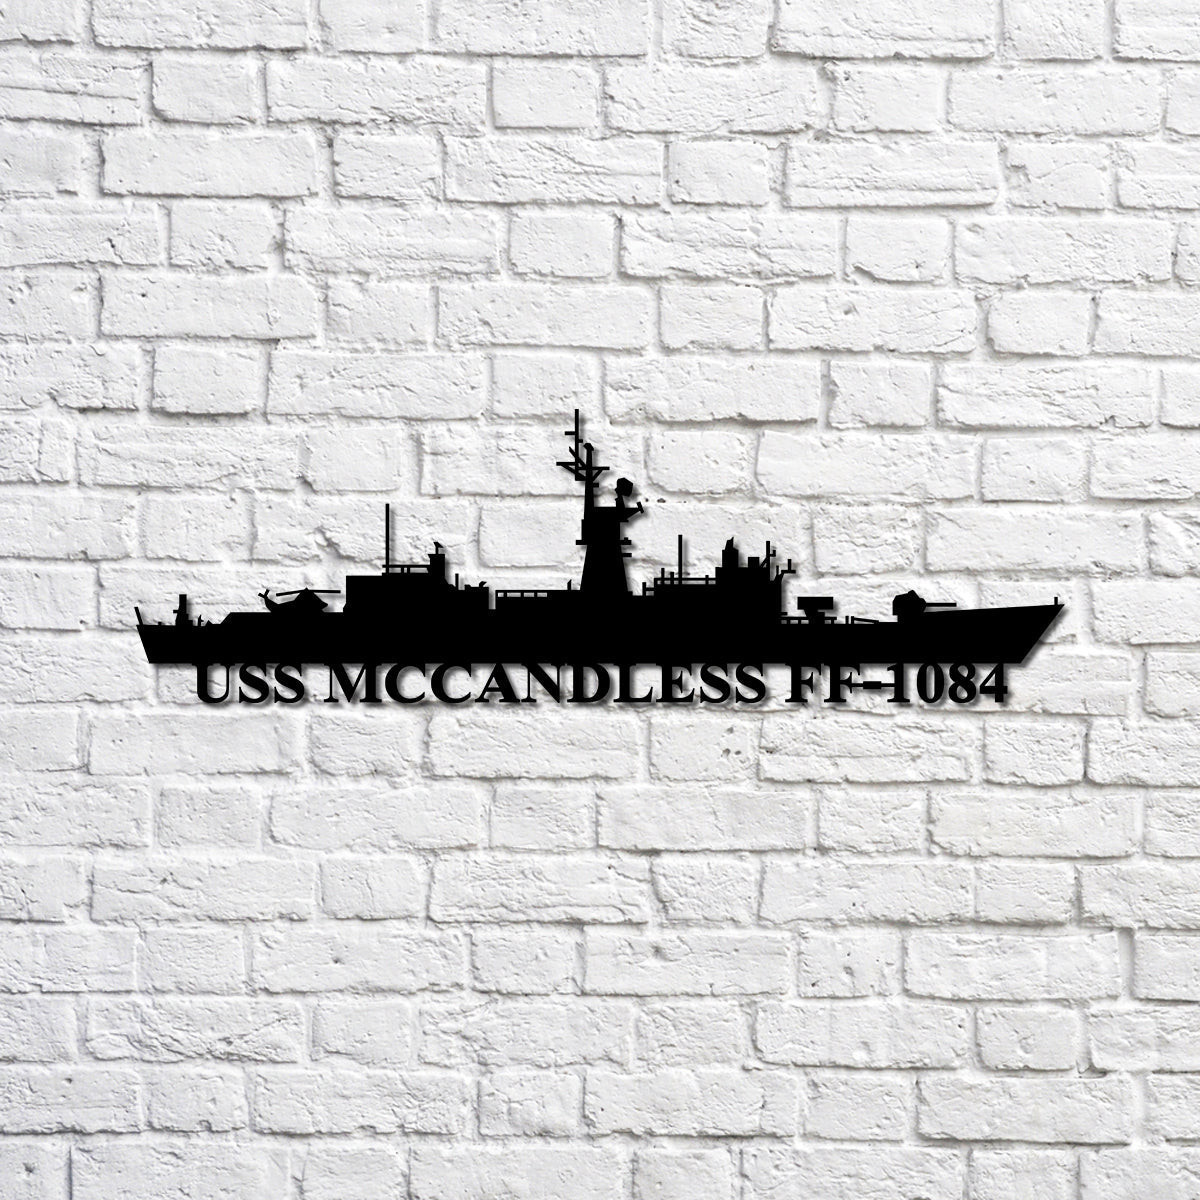 Uss Mccandless Ff1084 Navy Ship Metal Sign, Memory Wall Metal Sign Gift For Navy Veteran, Navy Ships Silhouette Metal Sign Laser Cut Metal Signs Custom Gift Ideas 12x12IN